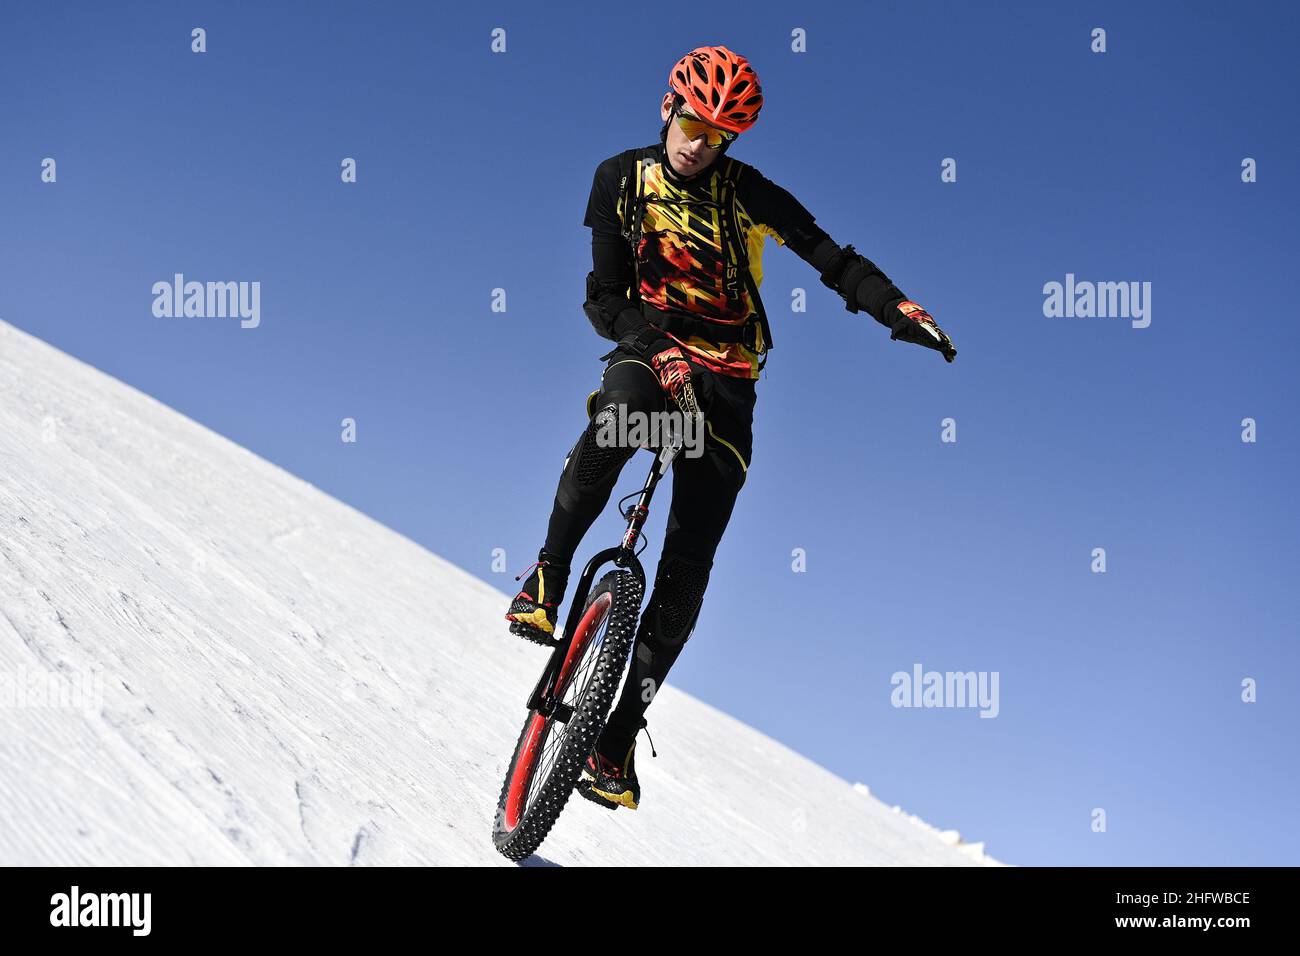 LaPresse - Marco Alpozzi February 25, 2021 Artesina (CN), Italy sport With the slopes throughout the Alps closed due to the Covid-19 pandemic, Marco Liprandi, 22 years old from Frabosa Soprana (CN), alpine ski instructor and coach, brings his passion for mono cycle to the ski slopes. After the ascent to Pian della Turra from Artesina, he begins the descent on the single cycle with spiked wheel. A single disc brake controlled from under the saddle ensures braking, while the free left arm moves in search of balance. Stock Photo